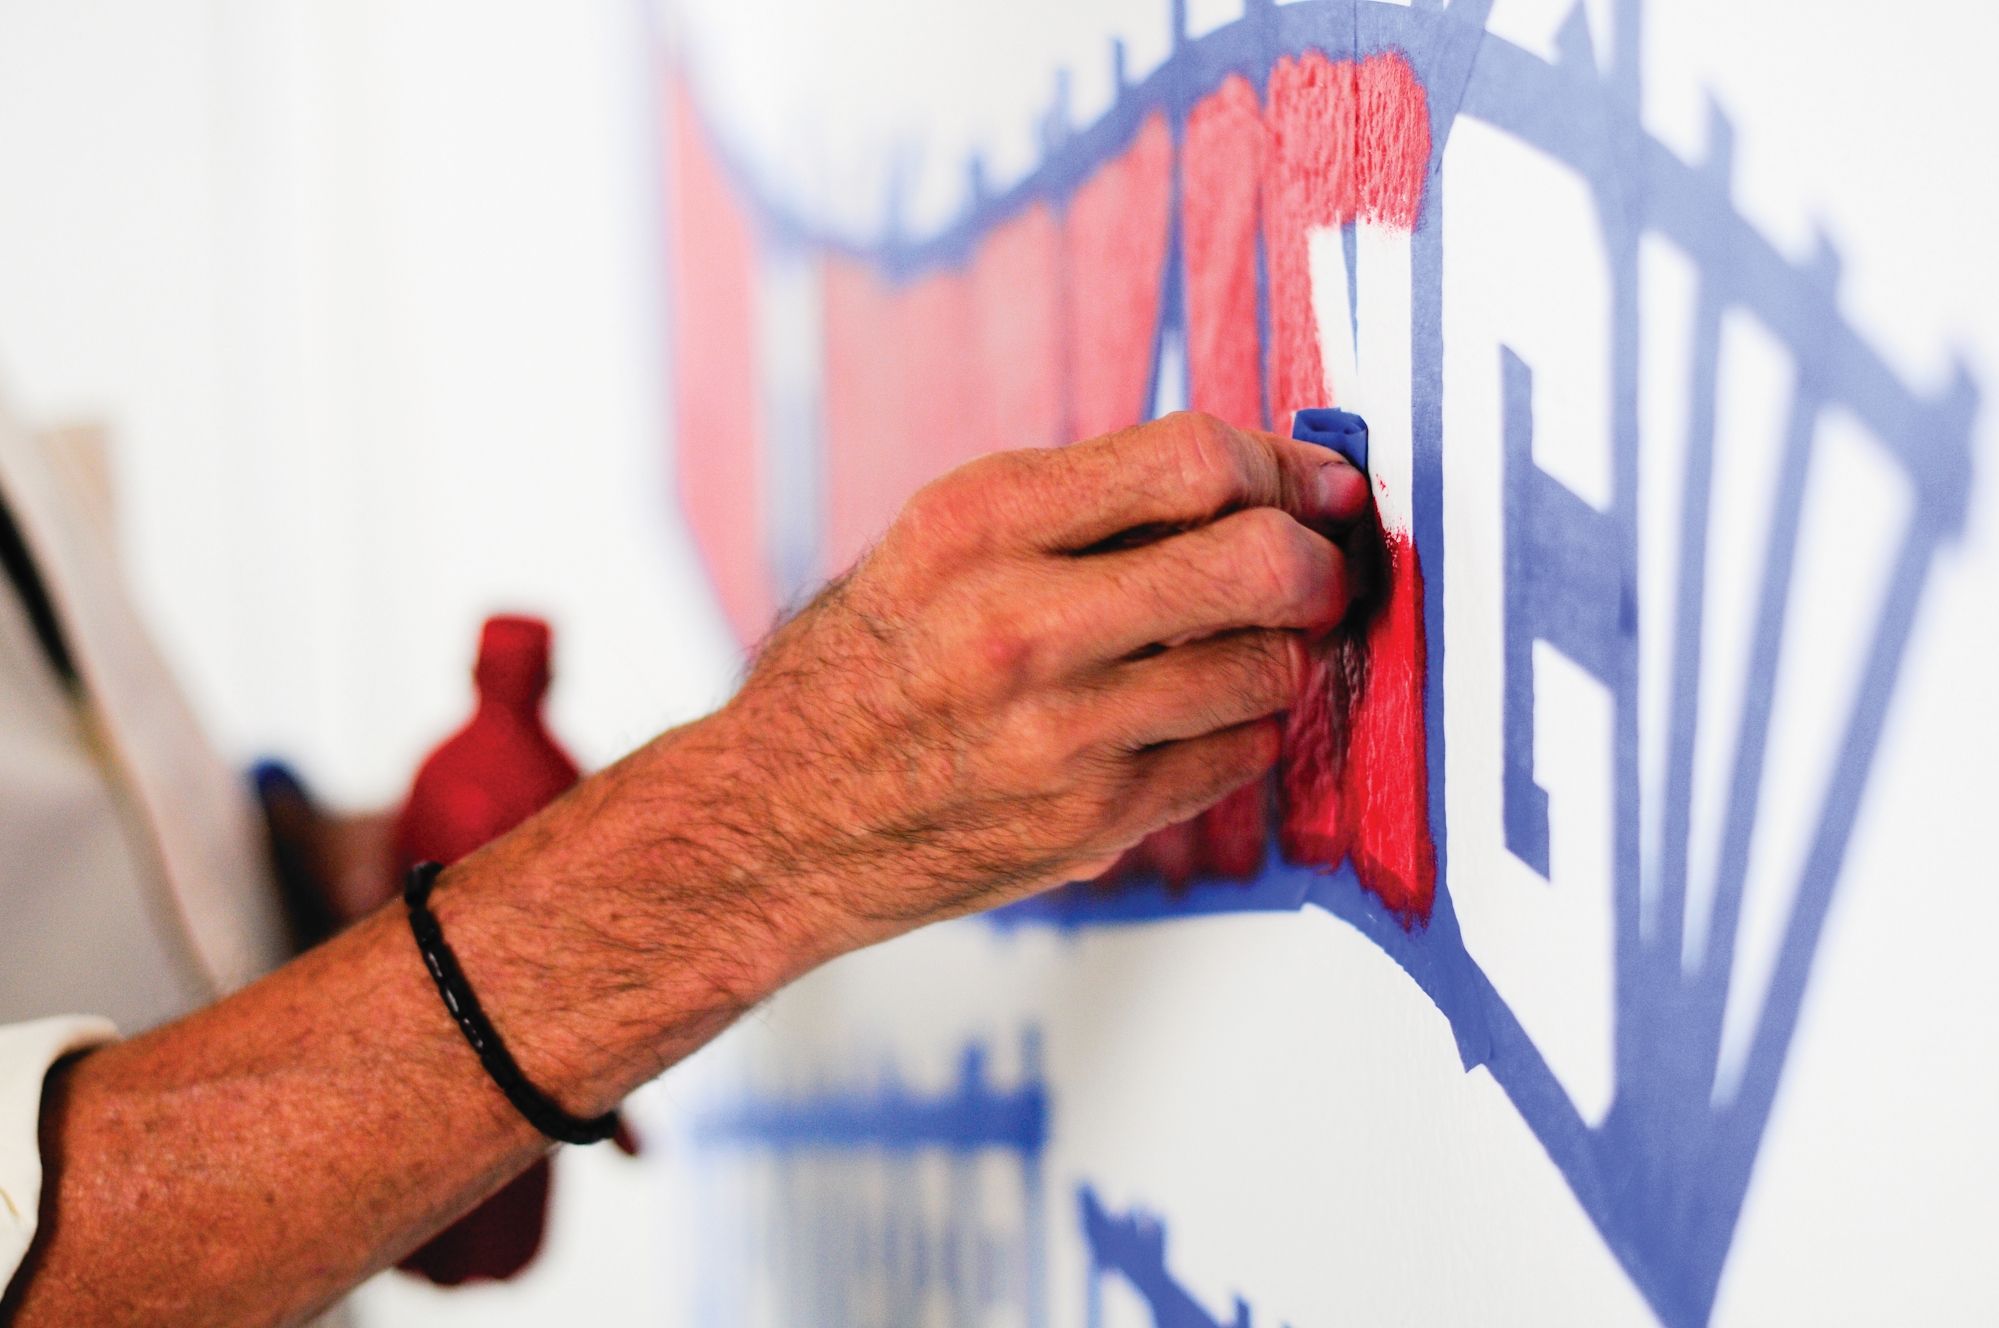 Close-up of a hand applying paint to a wall with letters outlined in masking tape.